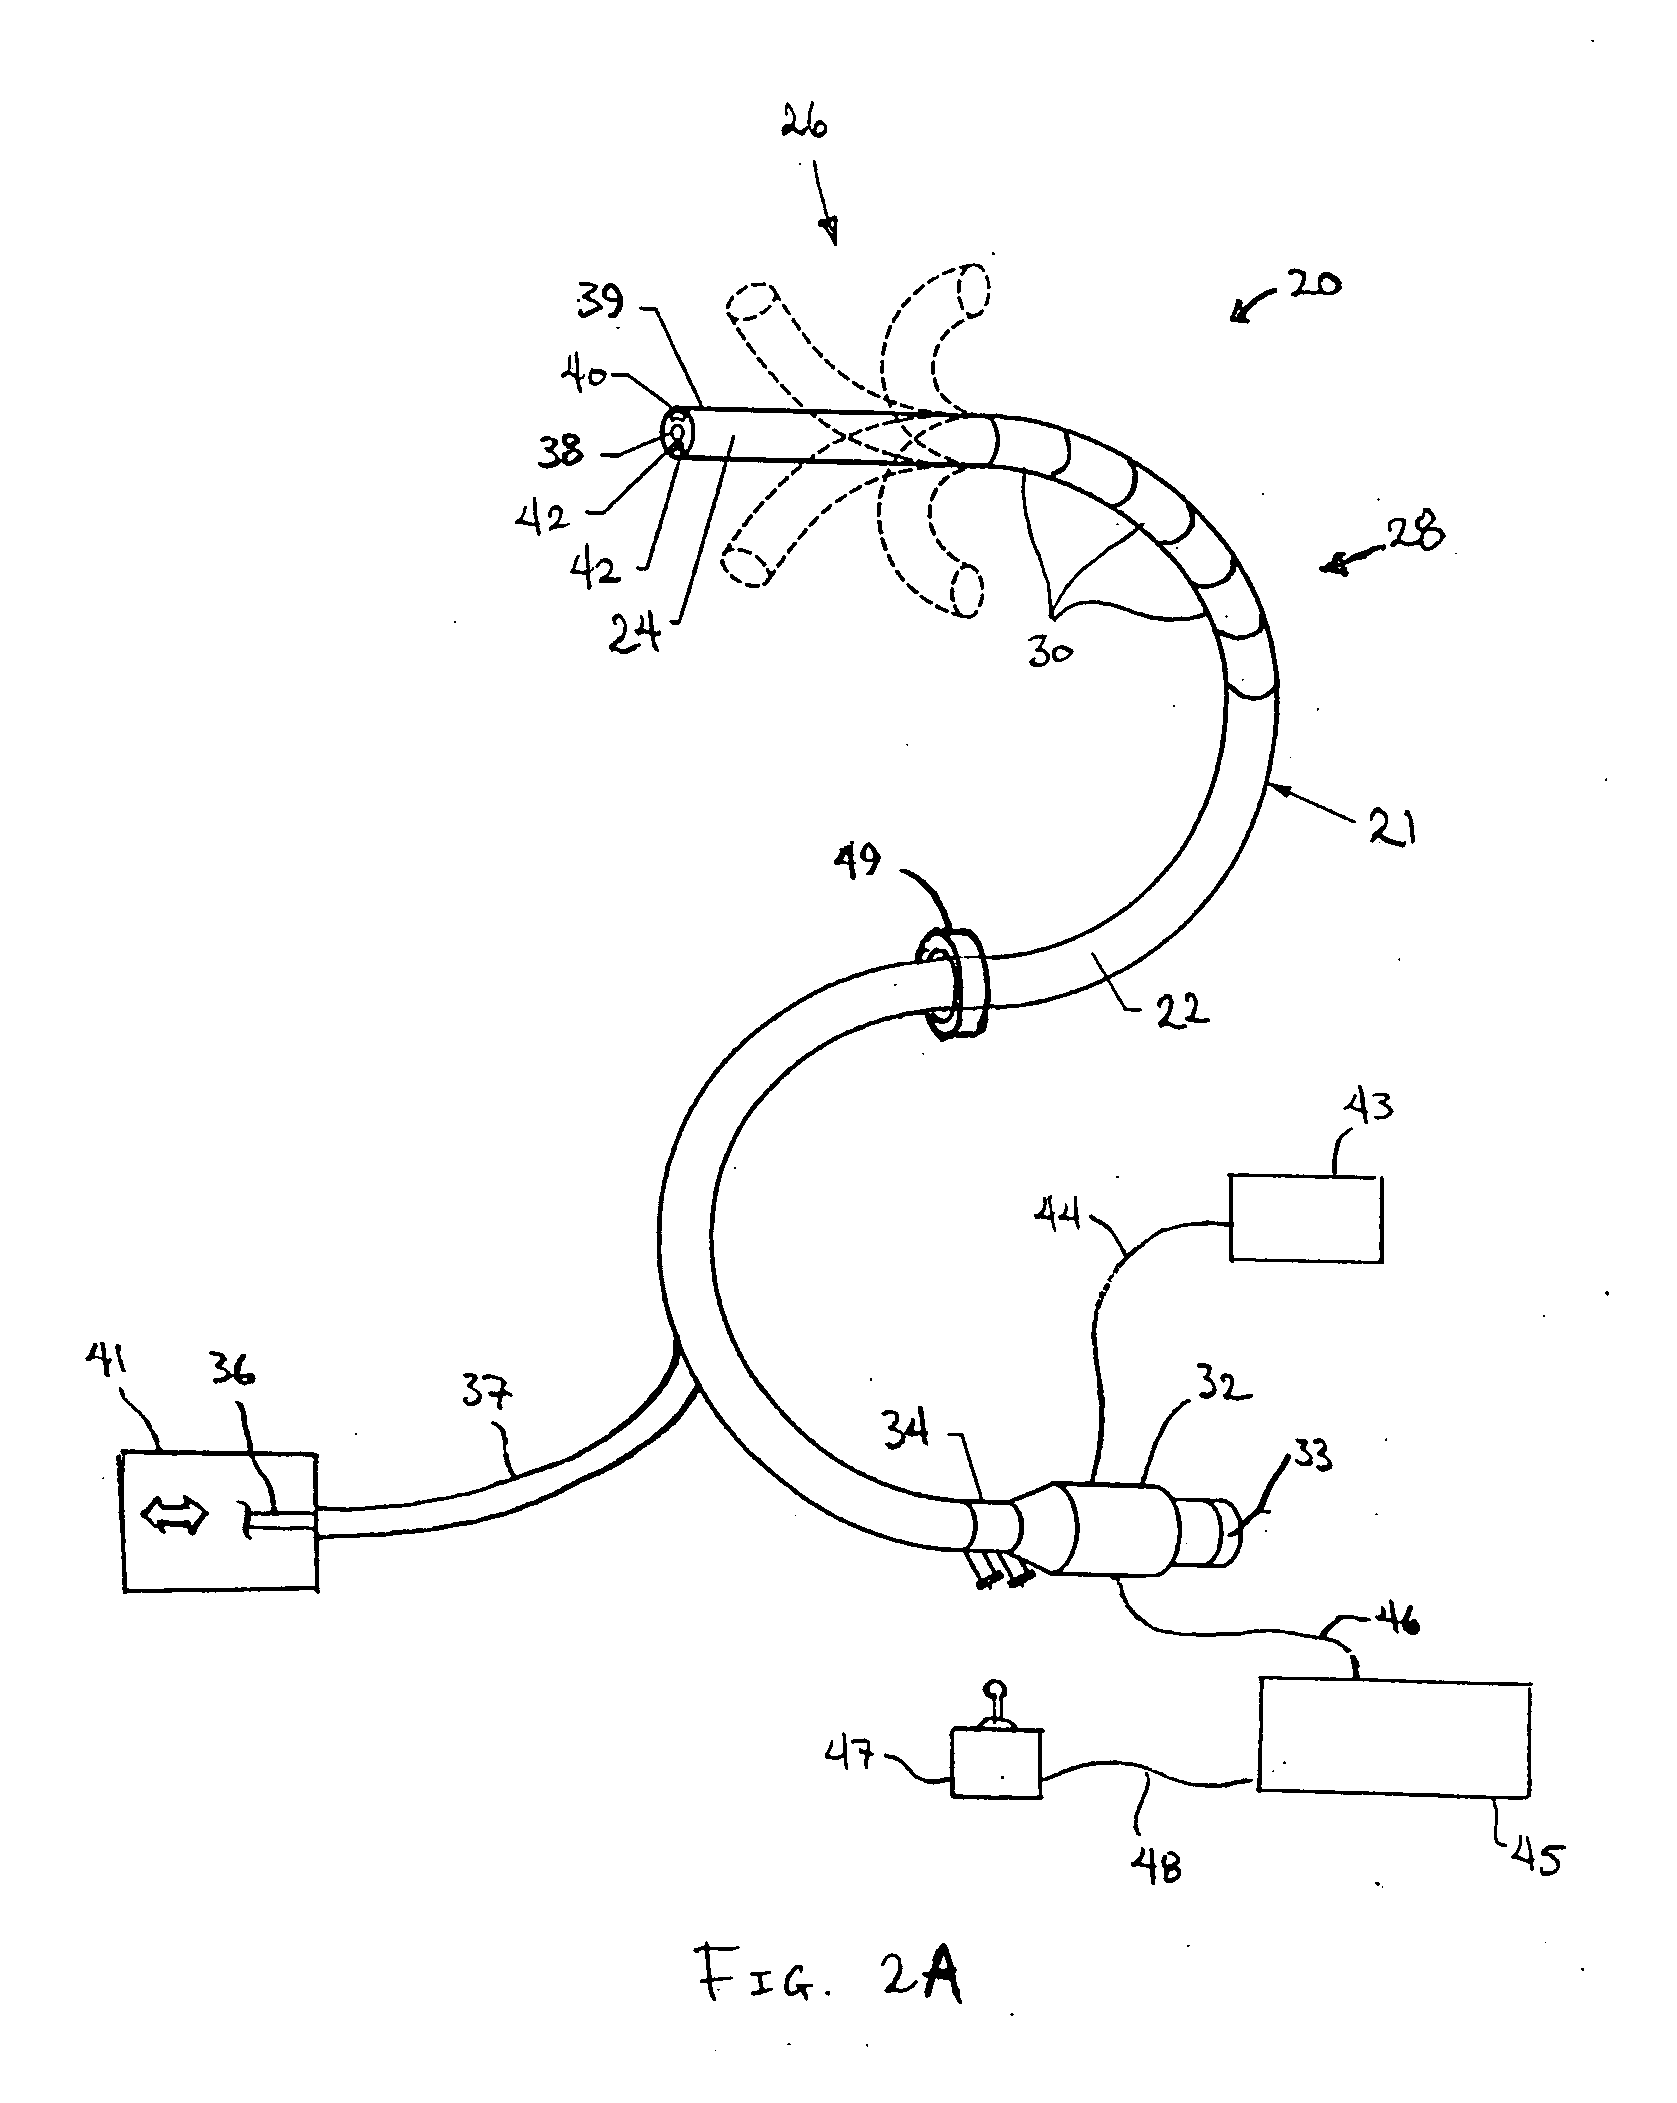 Method of navigating a therapeutic instrument with an apparatus having a handle coupled to an overtube